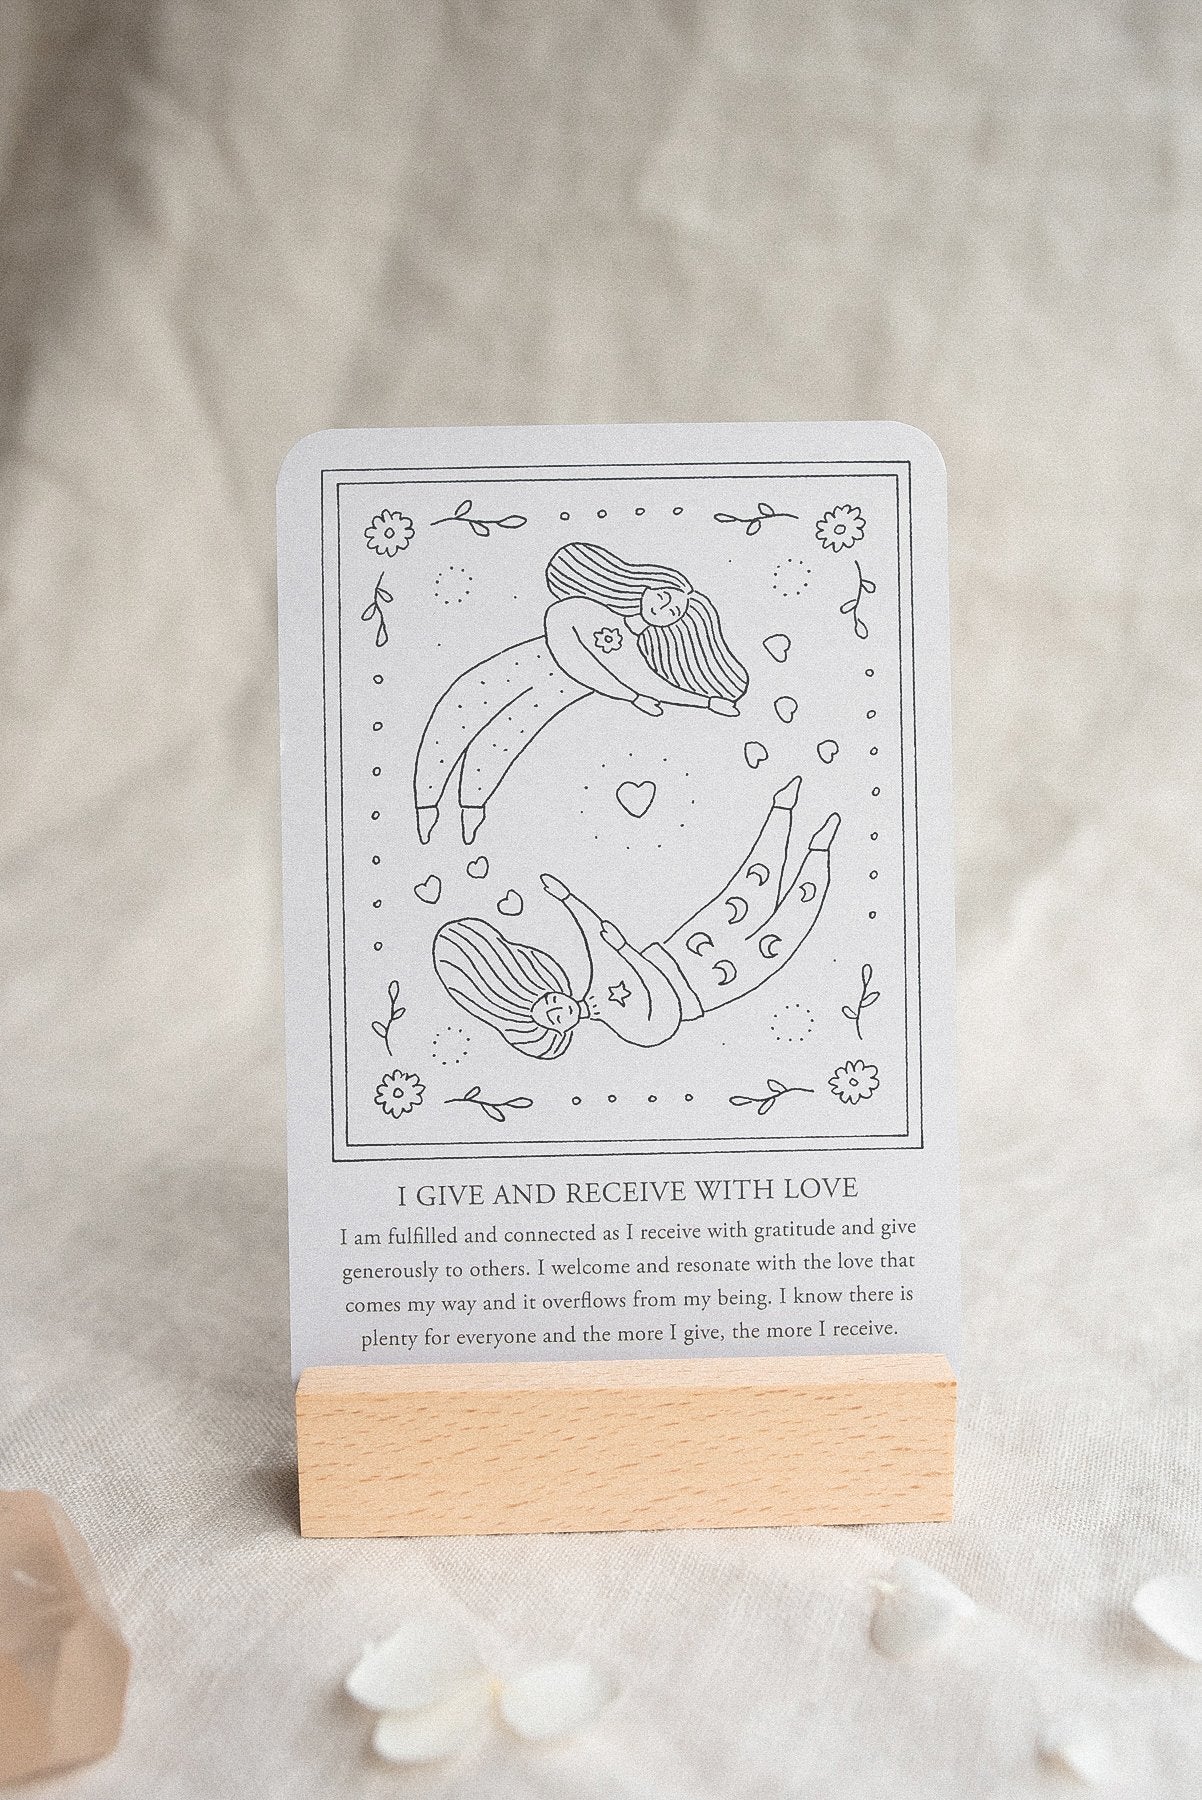 Musings from the Moon - Self-Love Affirmation Cards